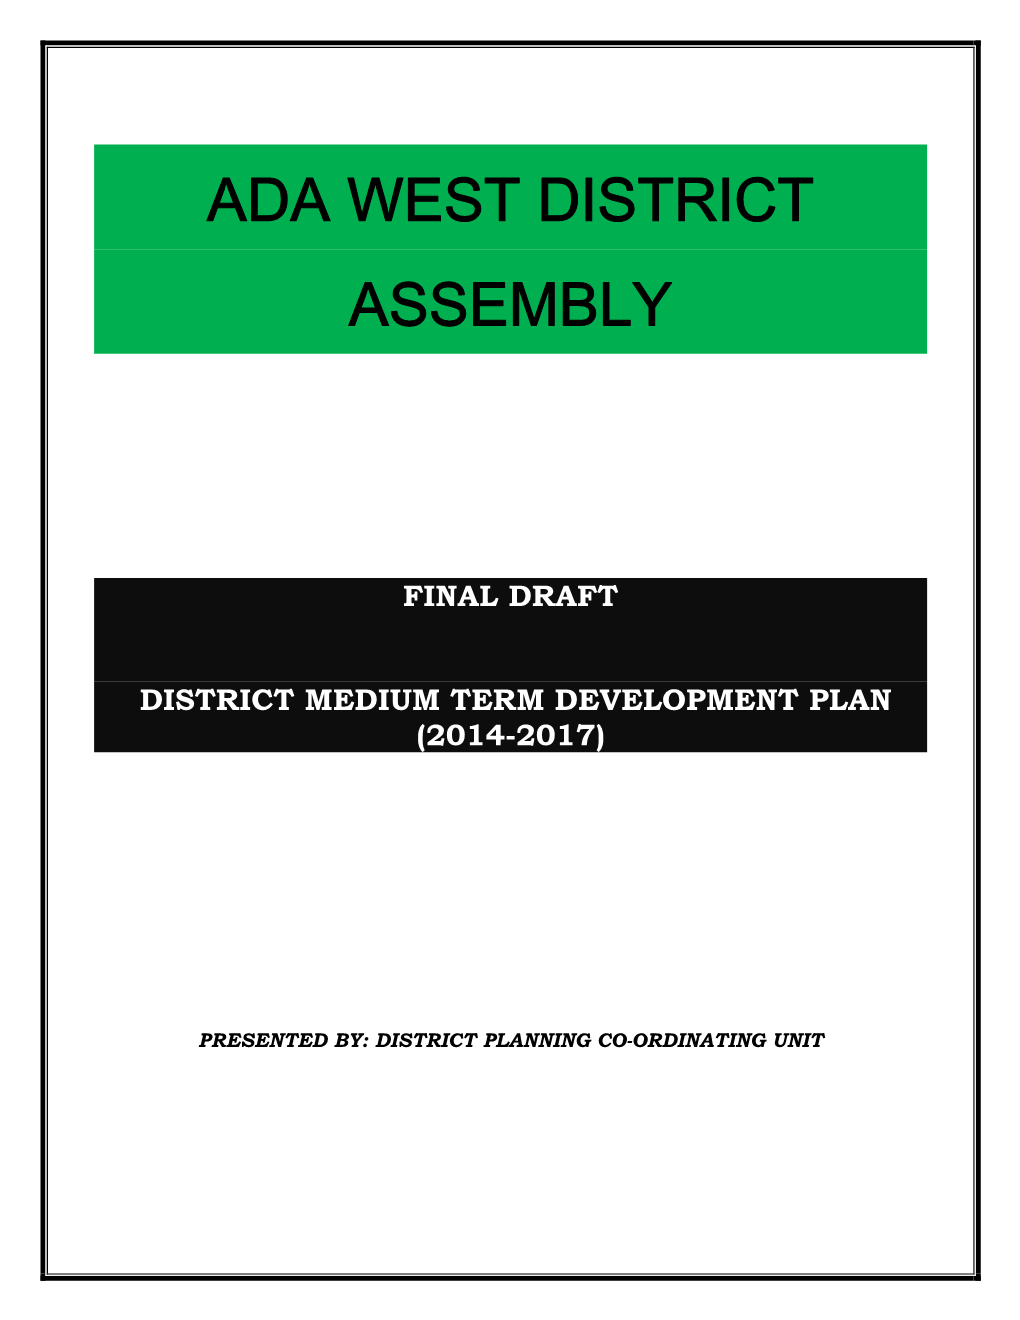 Ada West District Assembly